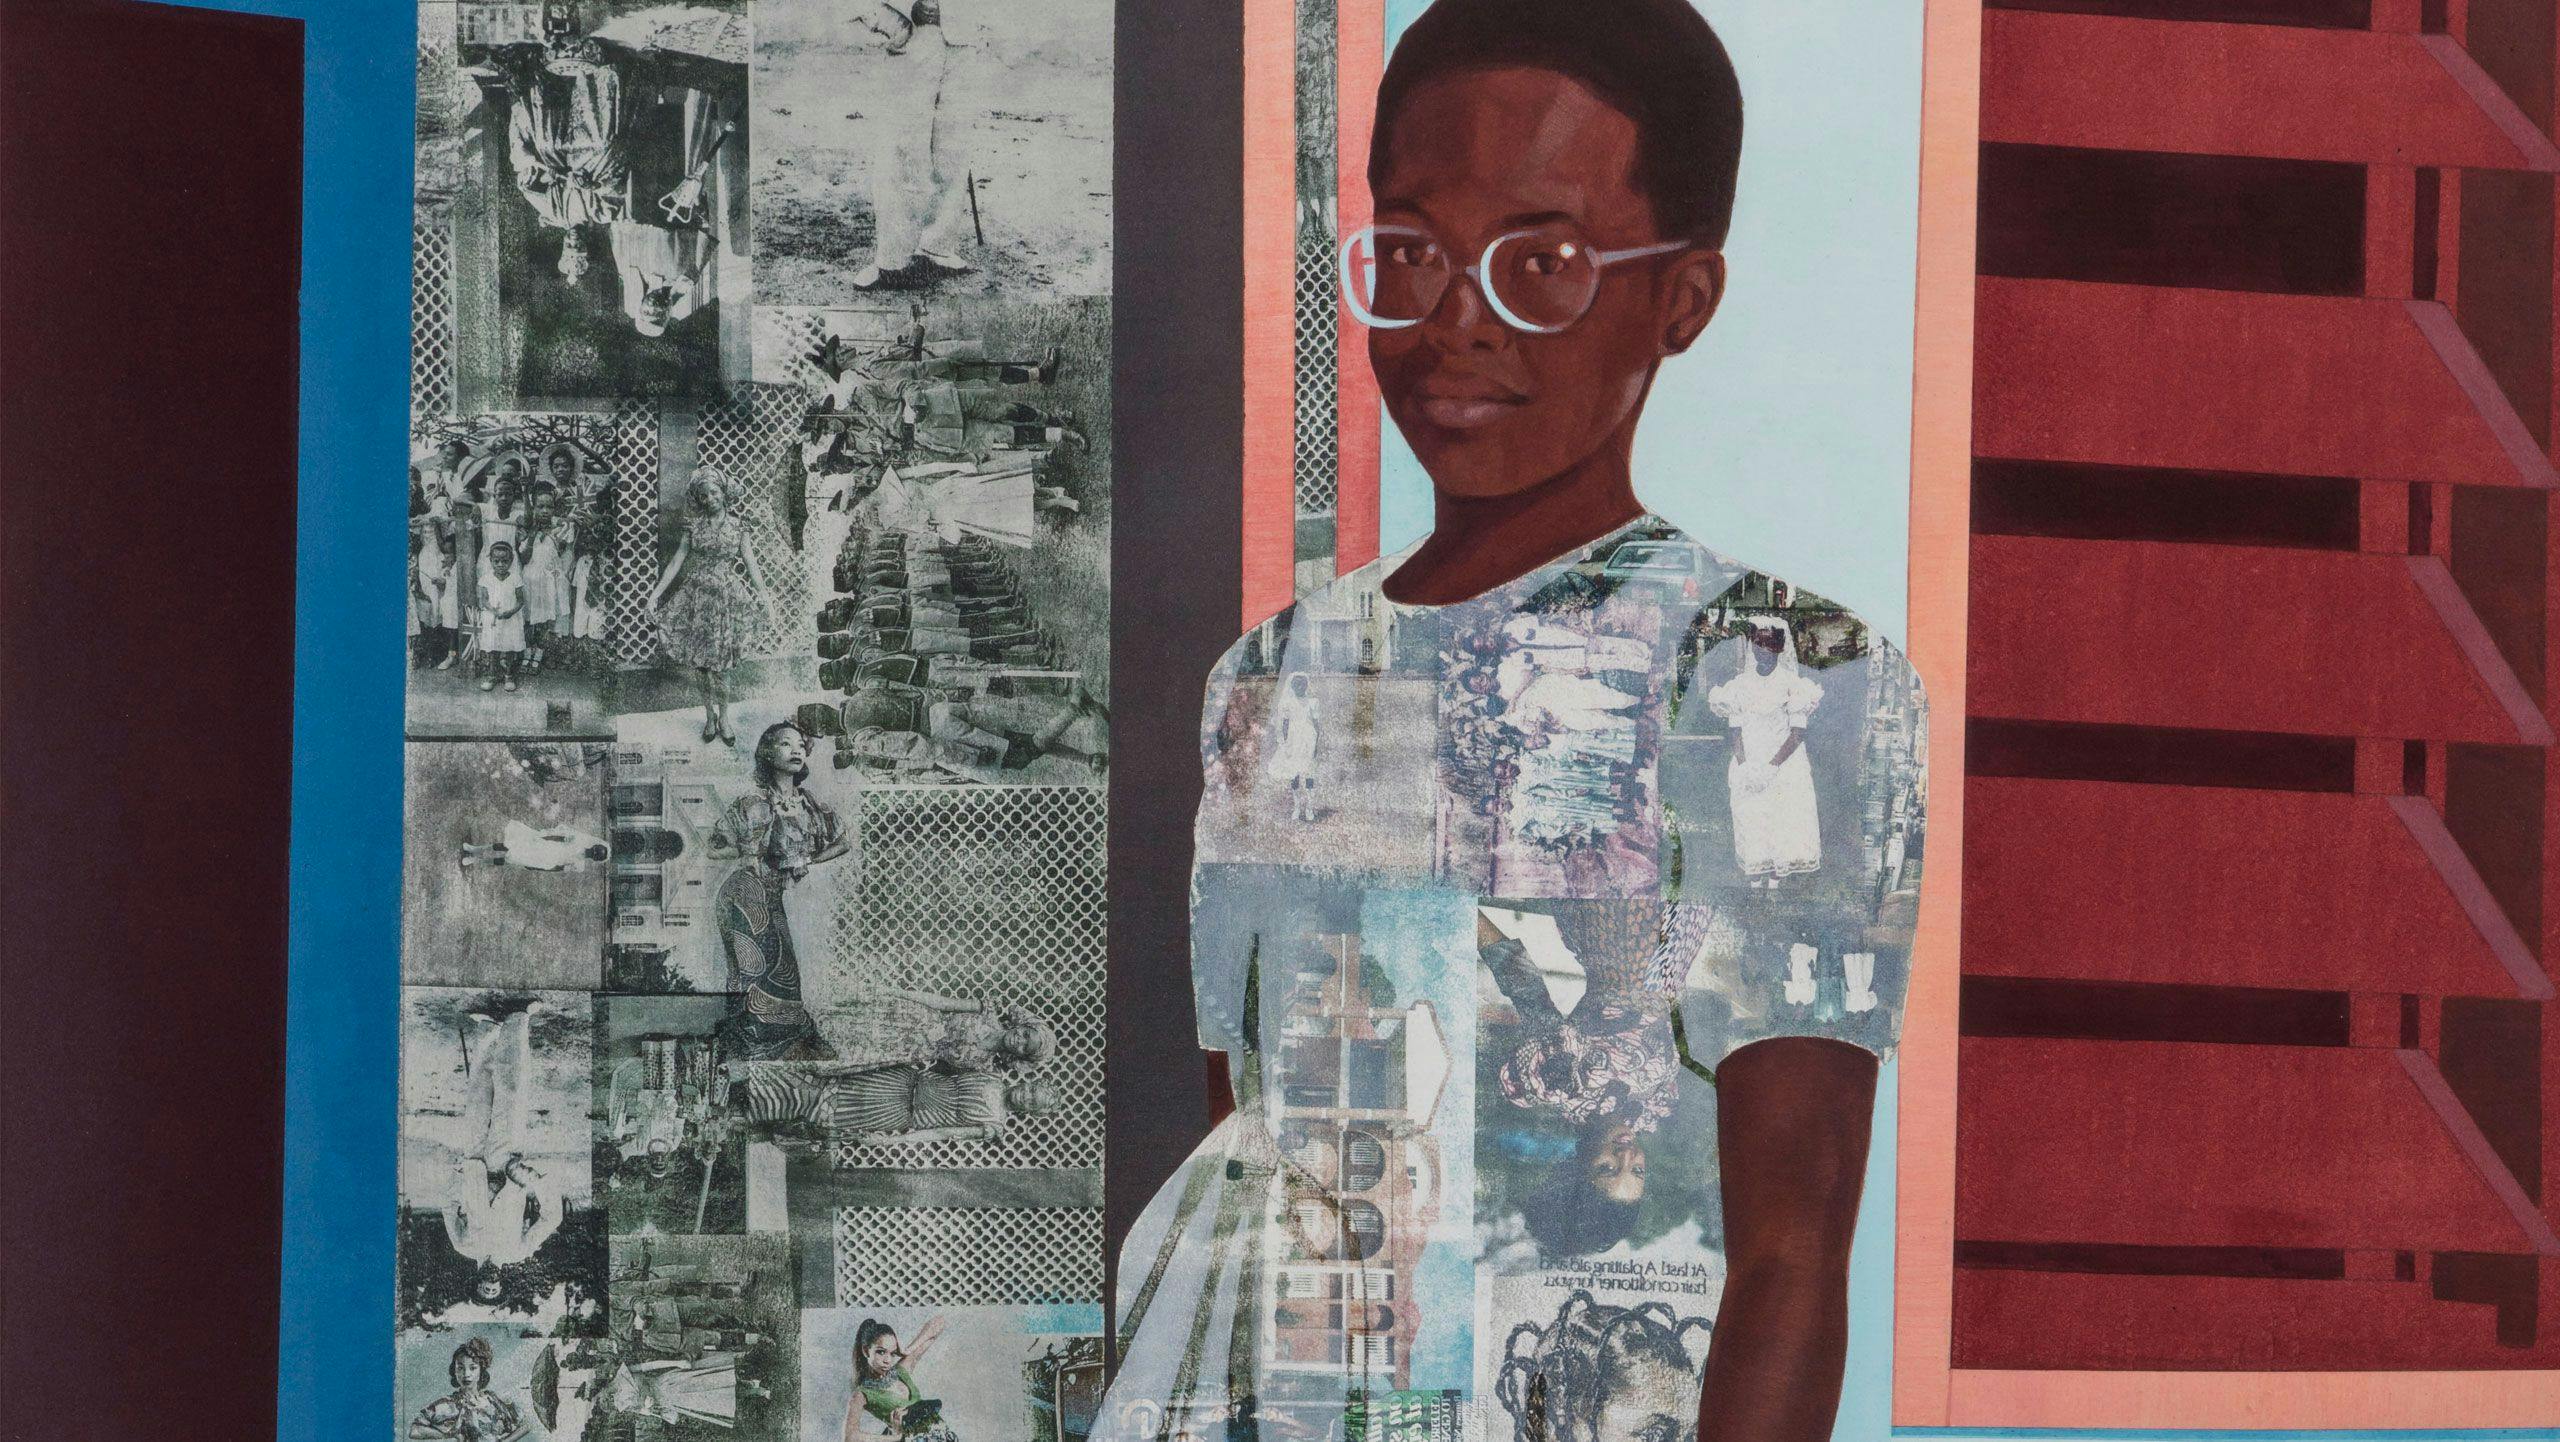 A detail of a painting by Njideka Akunyili Crosby titled “The Beautyful Ones Series” #1c, dated 2014.